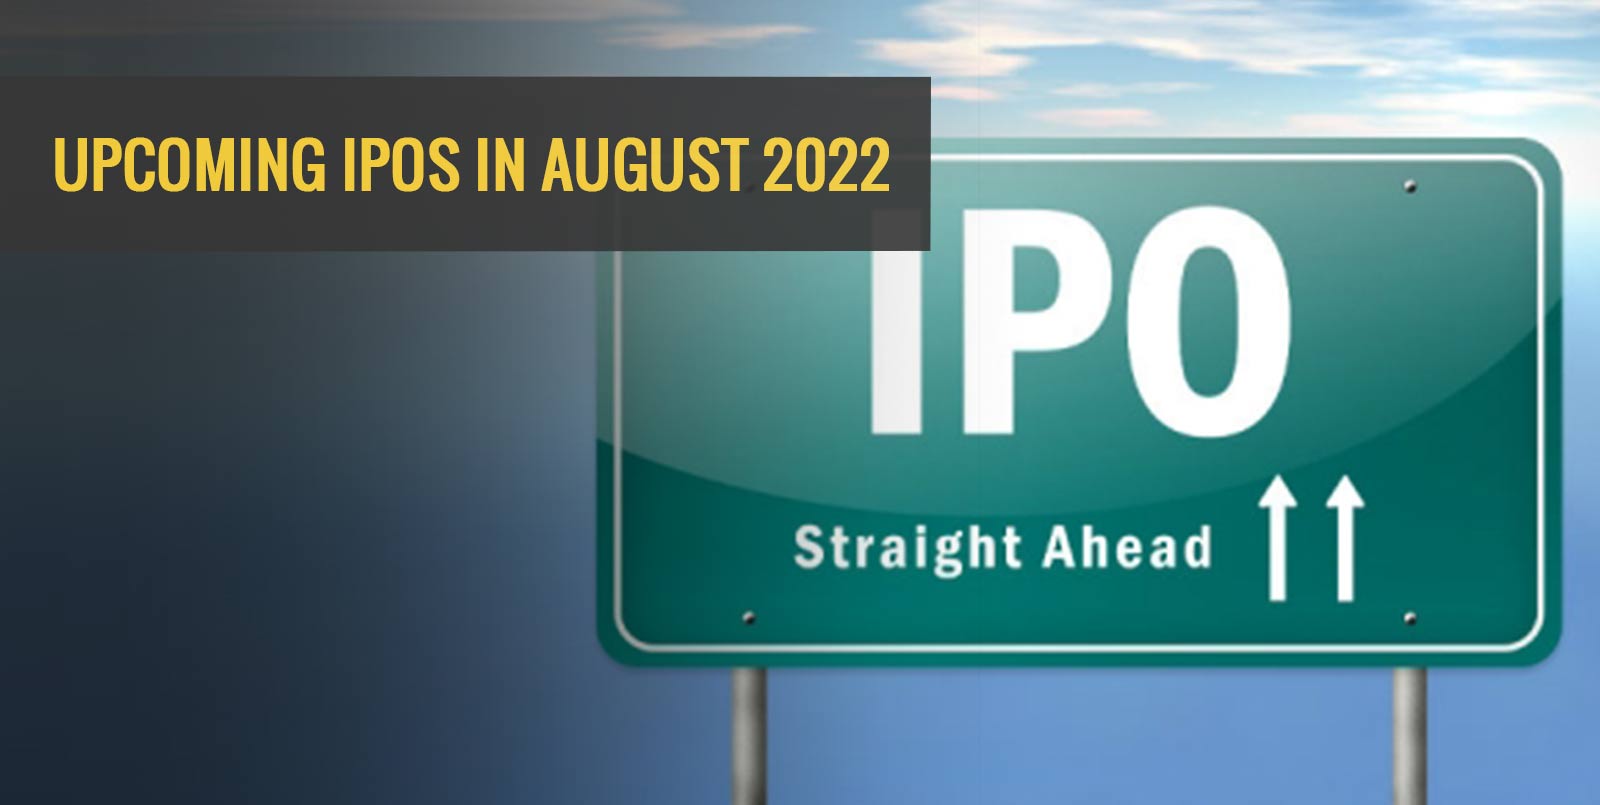 Upcoming IPO in August 2022